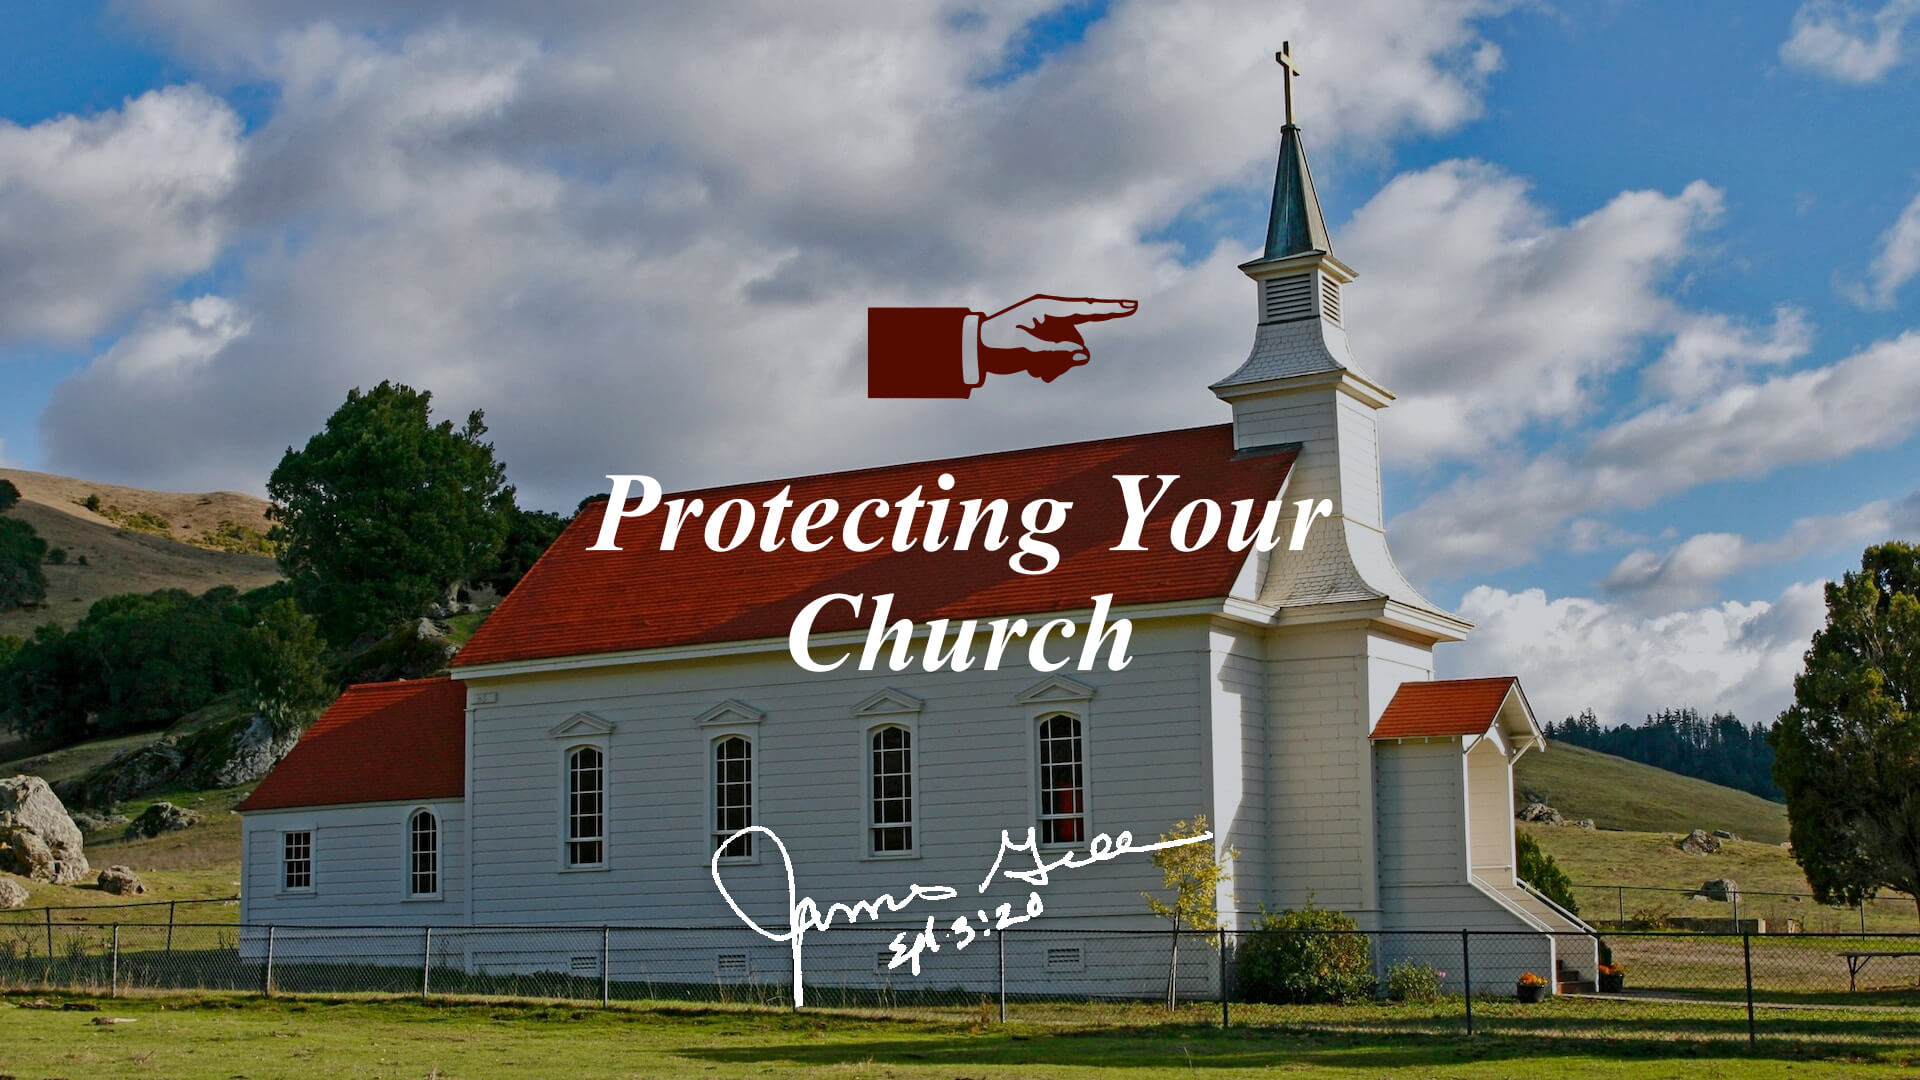 Protecting Your Church